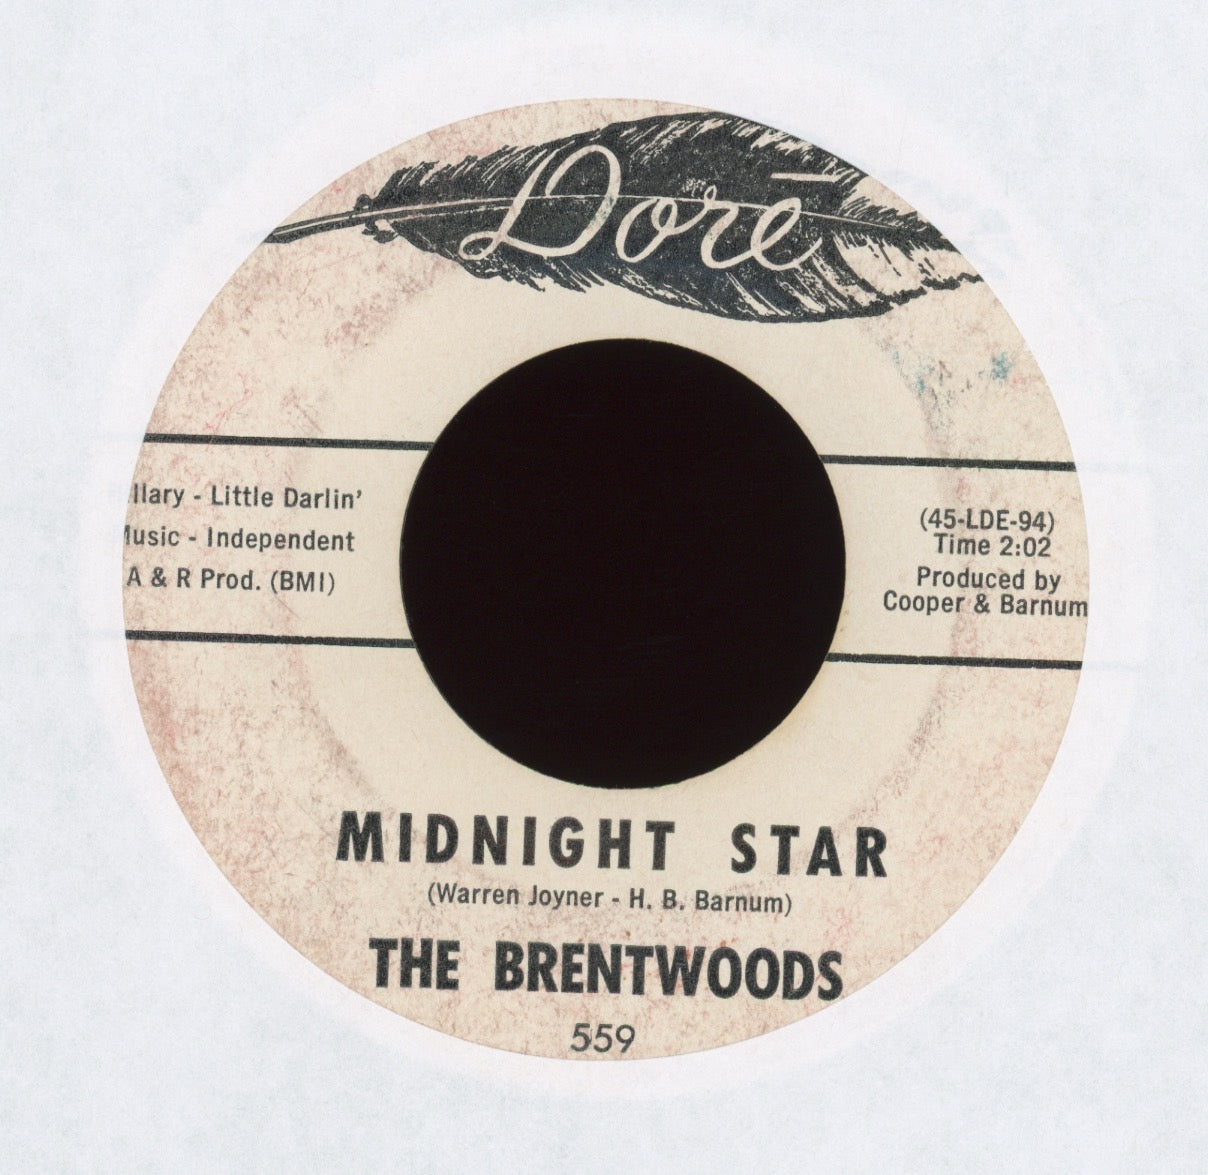 The Brentwoods - Midnight Star on Dore R&B Doo Wop 45